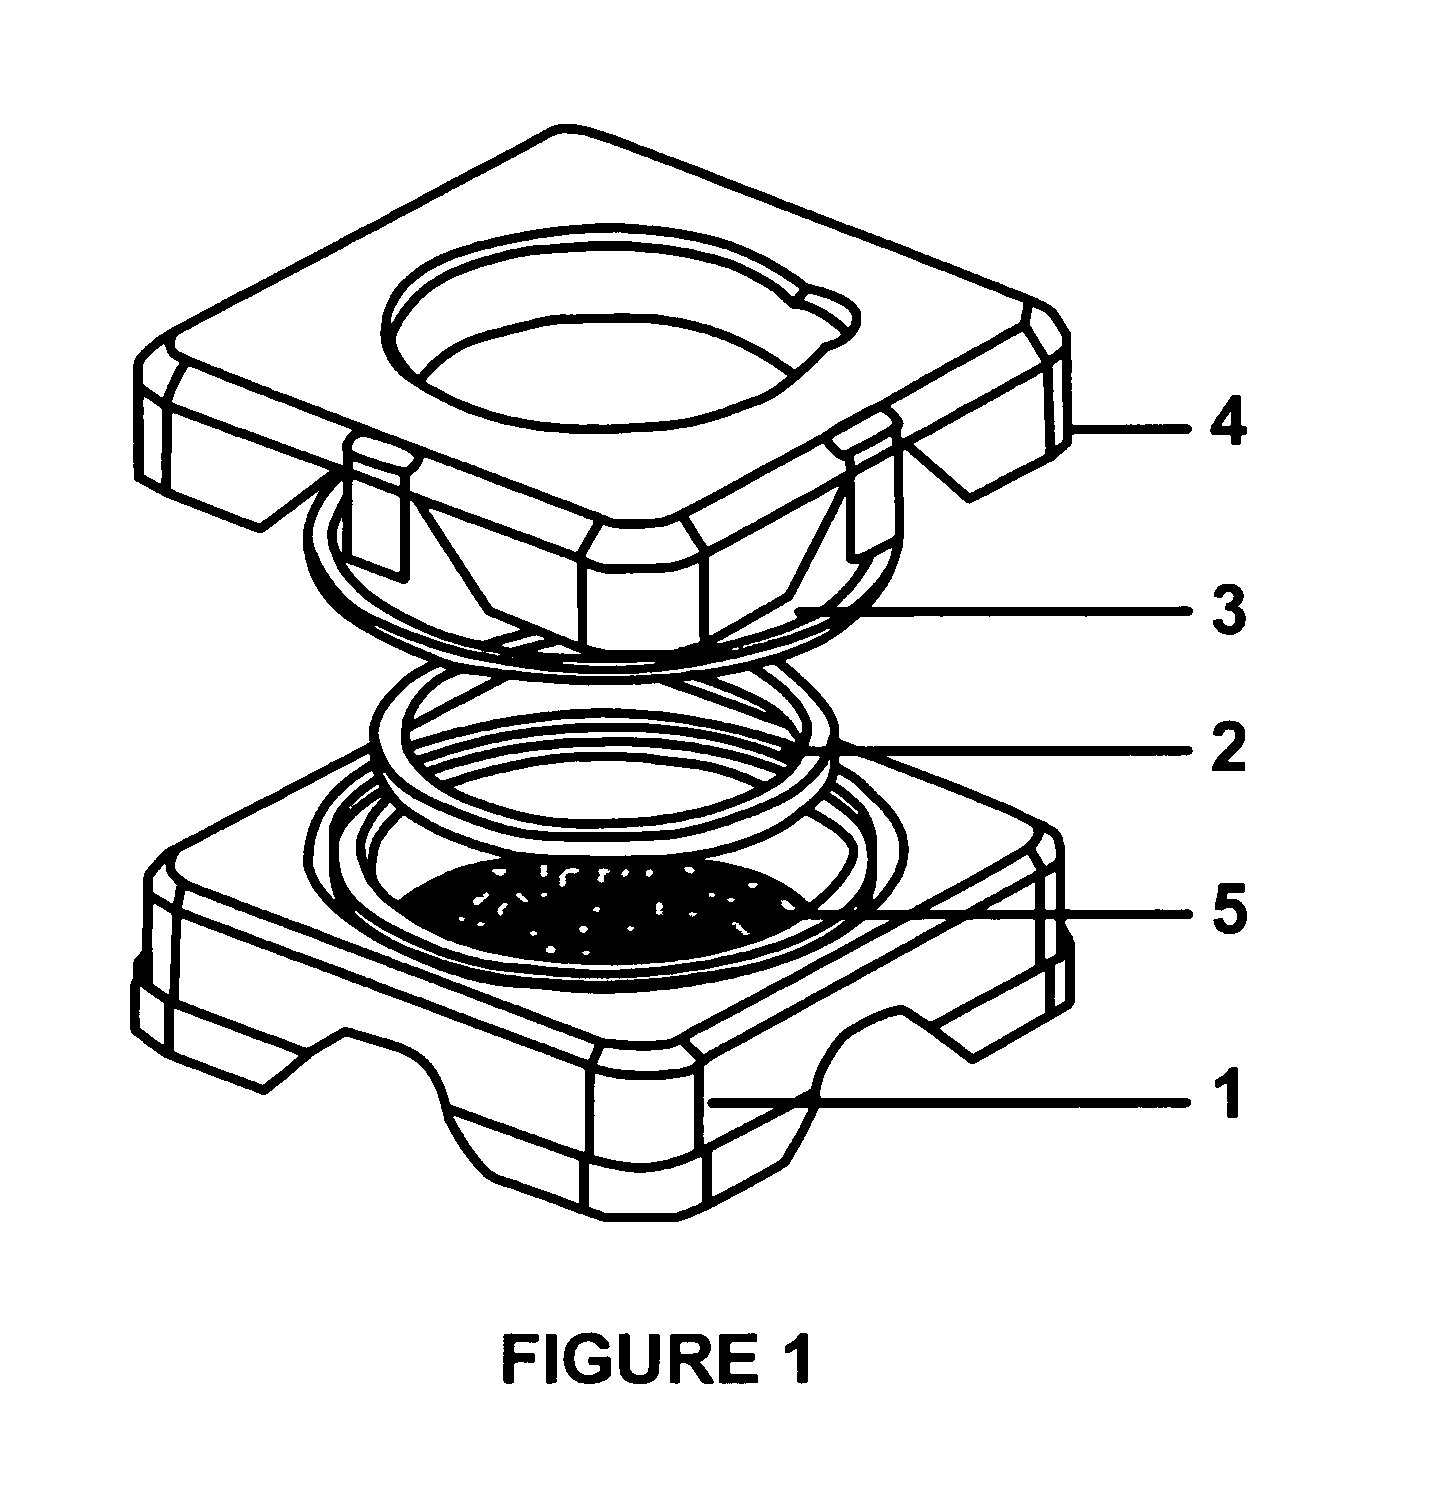 Device for culturing and transporting cells